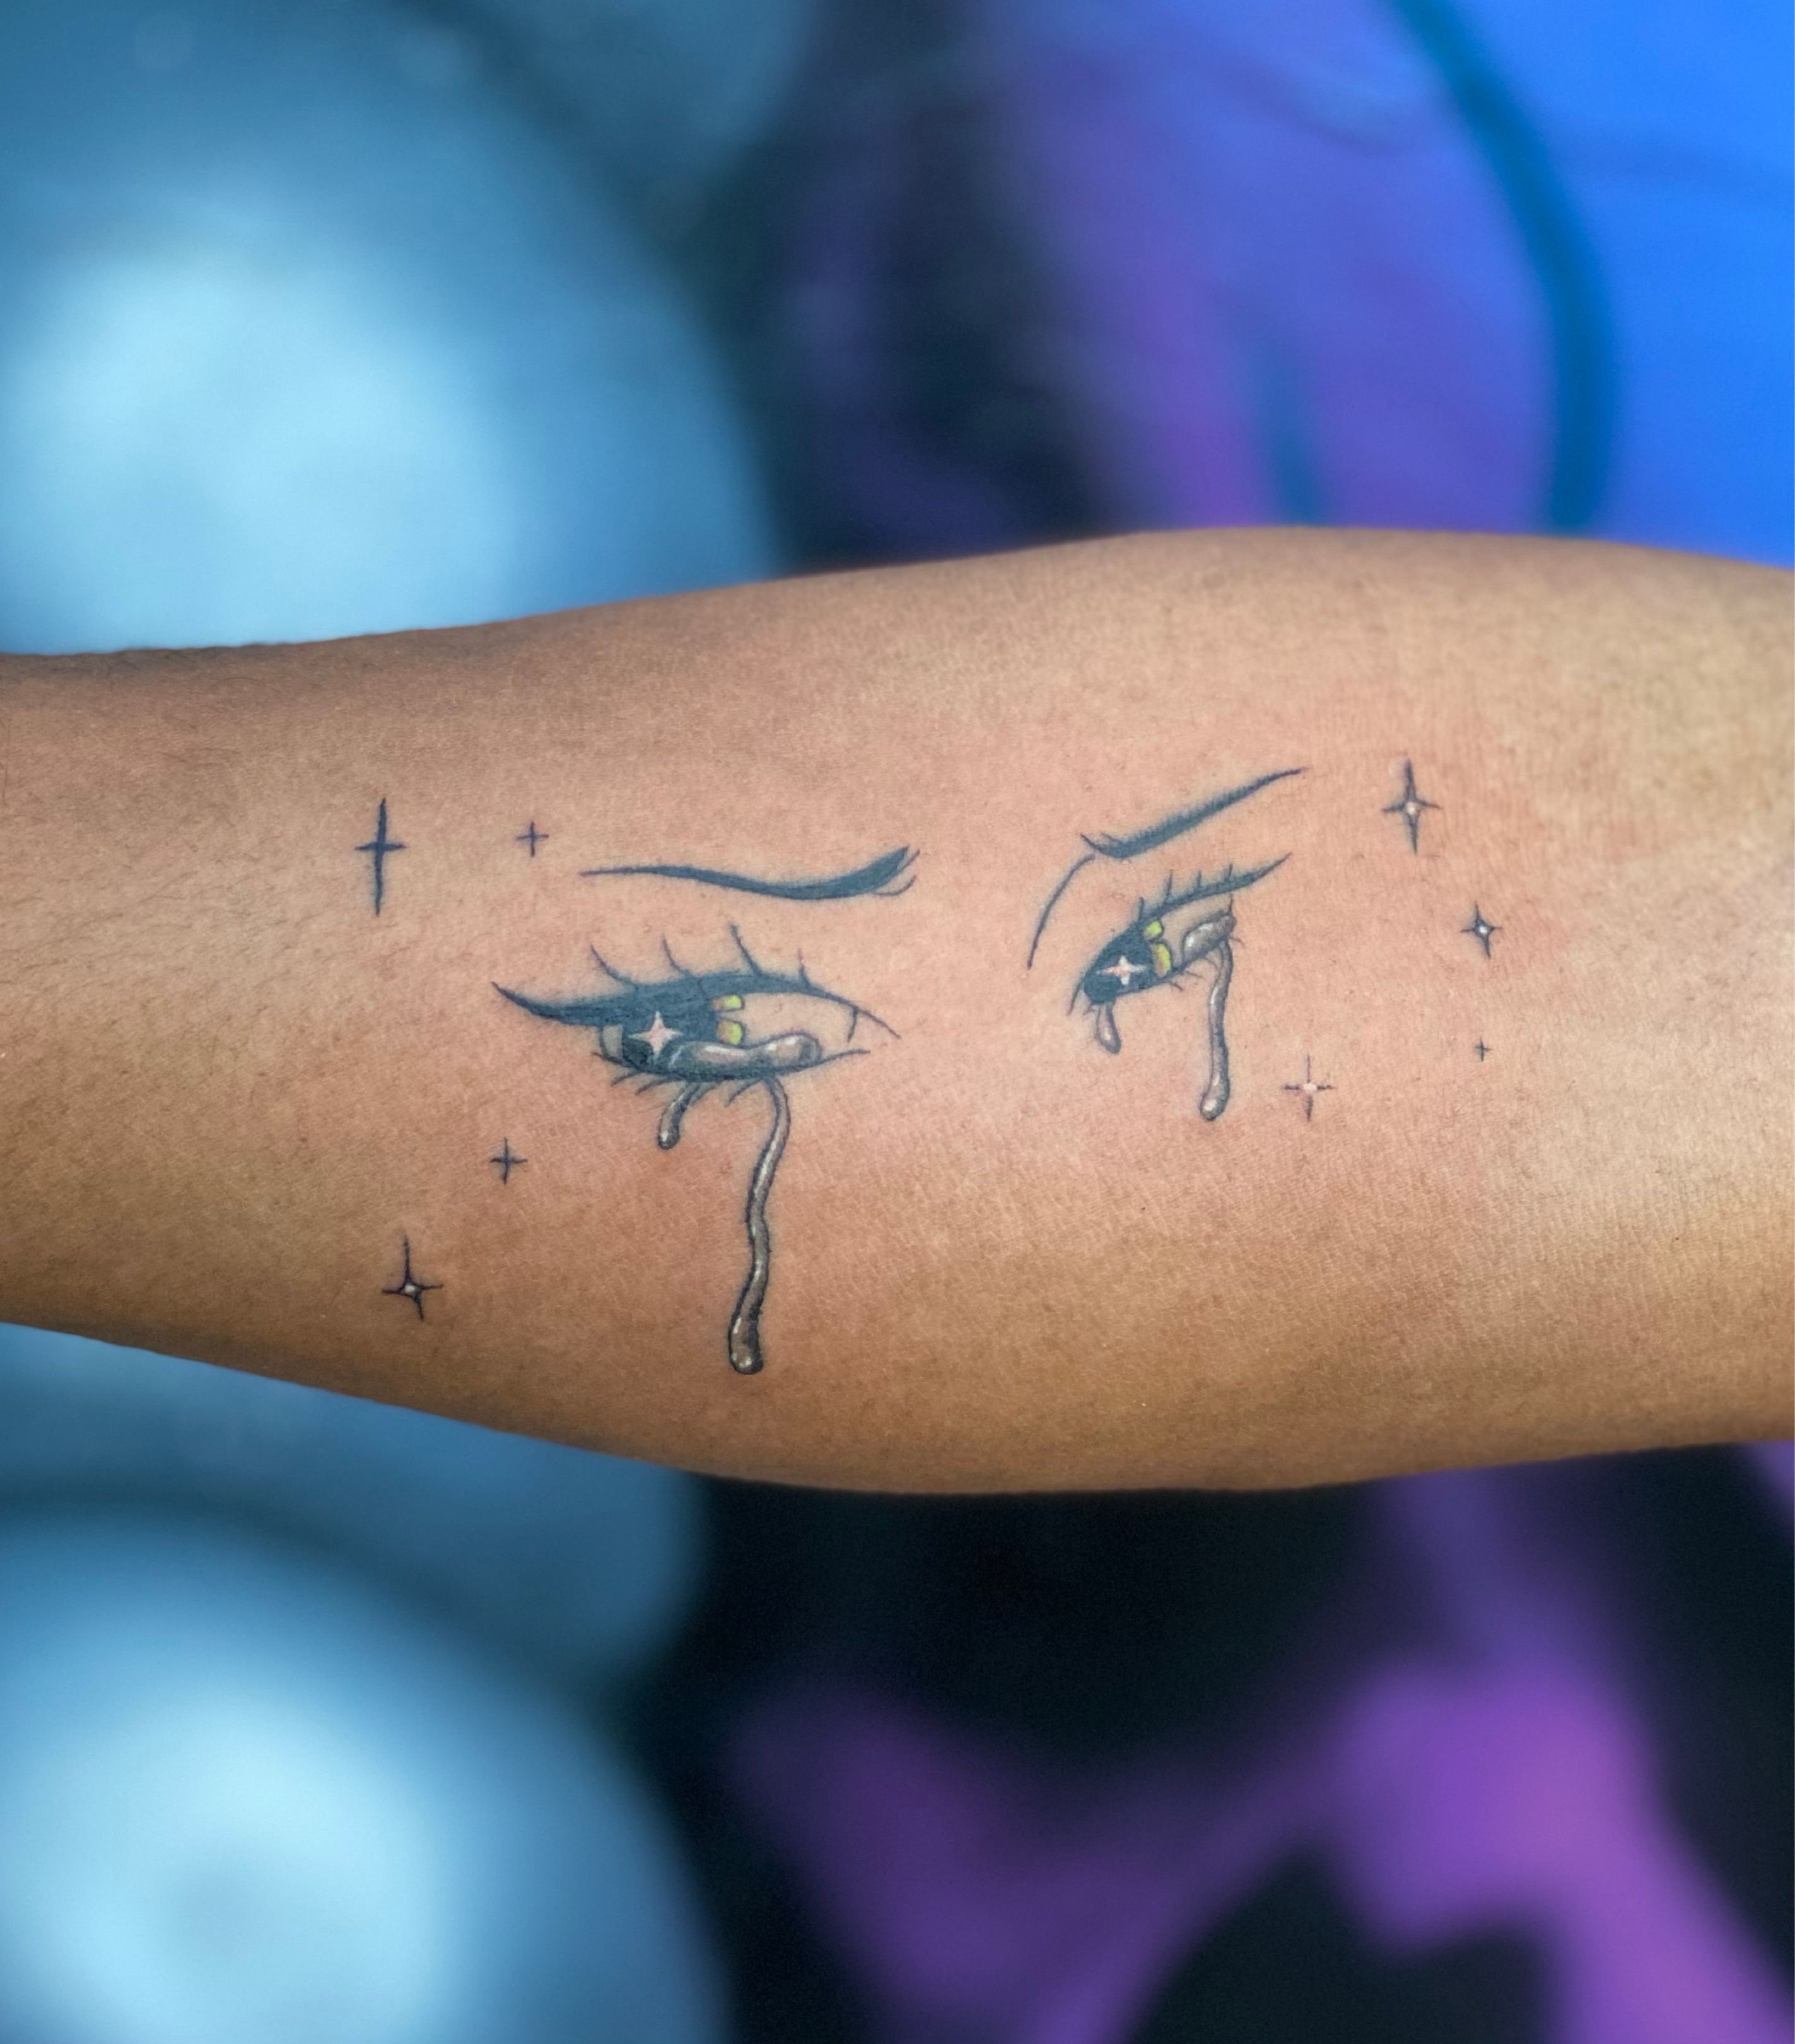 15 Refreshing Anime Eyes Tattoo Ideas Recommended